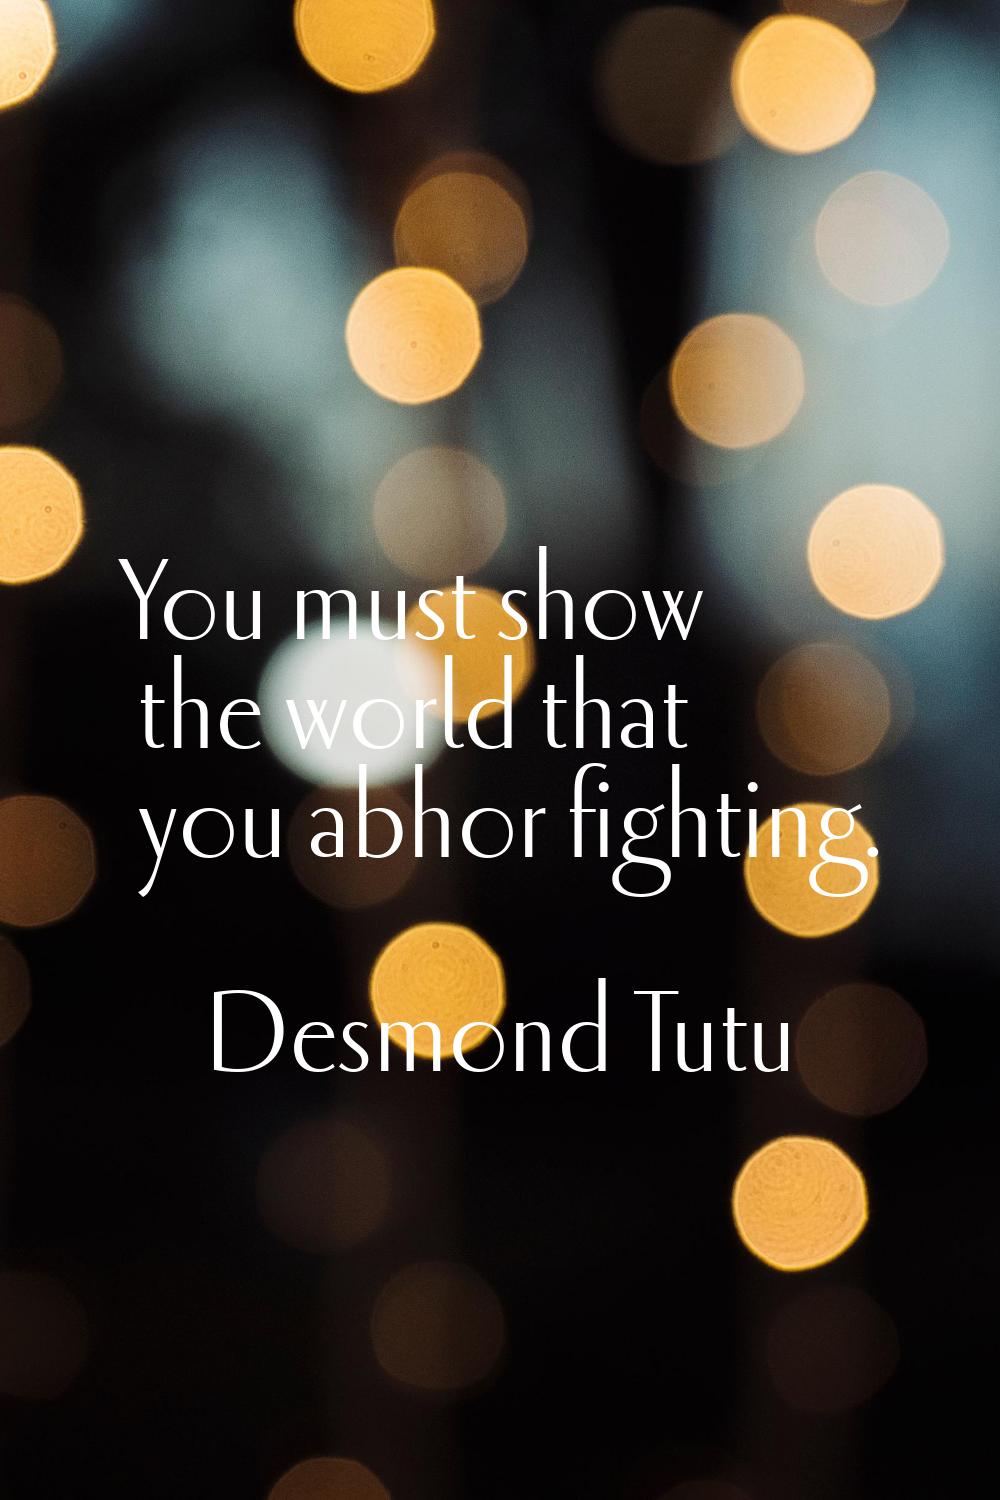 You must show the world that you abhor fighting.